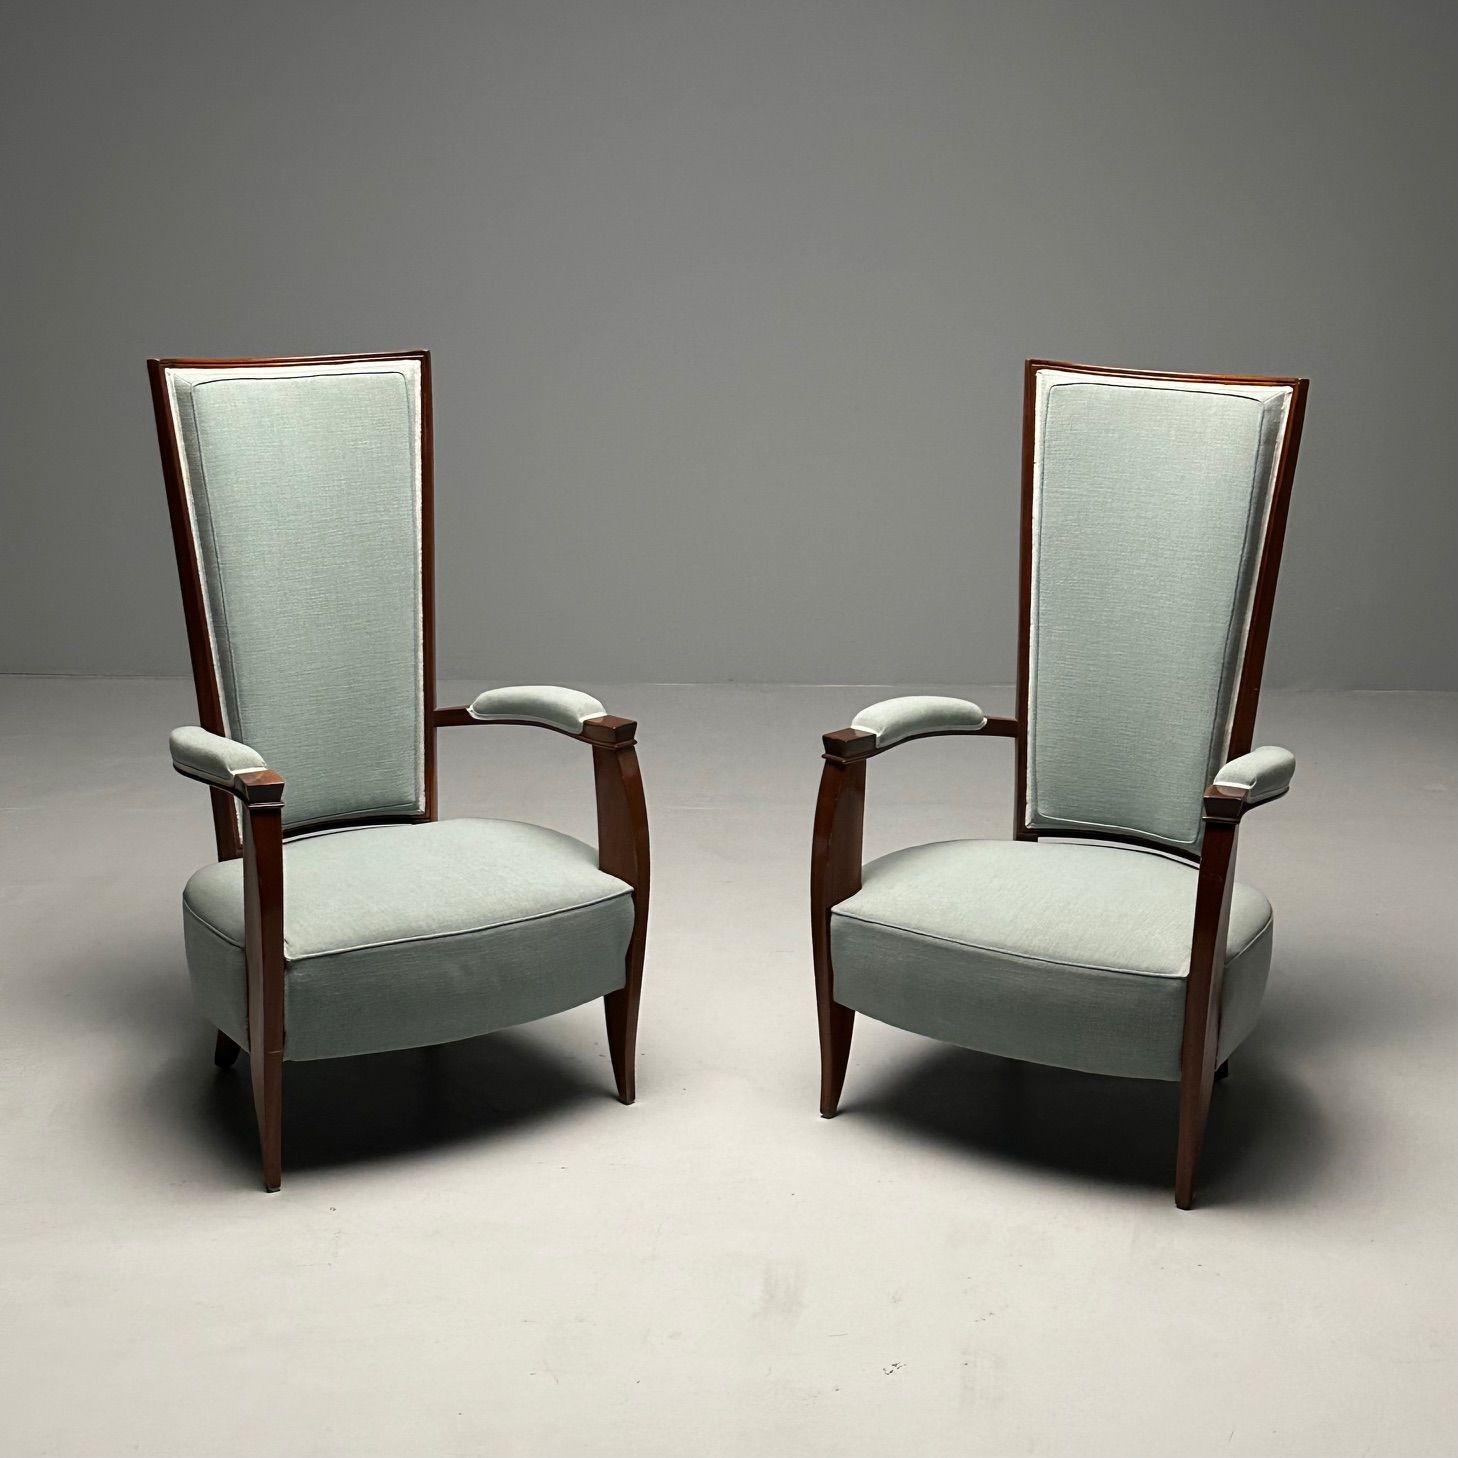 Pair French Art Deco Mahogany High-Back Arm / Occasional Chairs, Turqoise Linen

Set of two high-back French deco style armchairs having sleek Mahogany frames and durable later turquoise upholstery. Stylistically very similar to the work of French